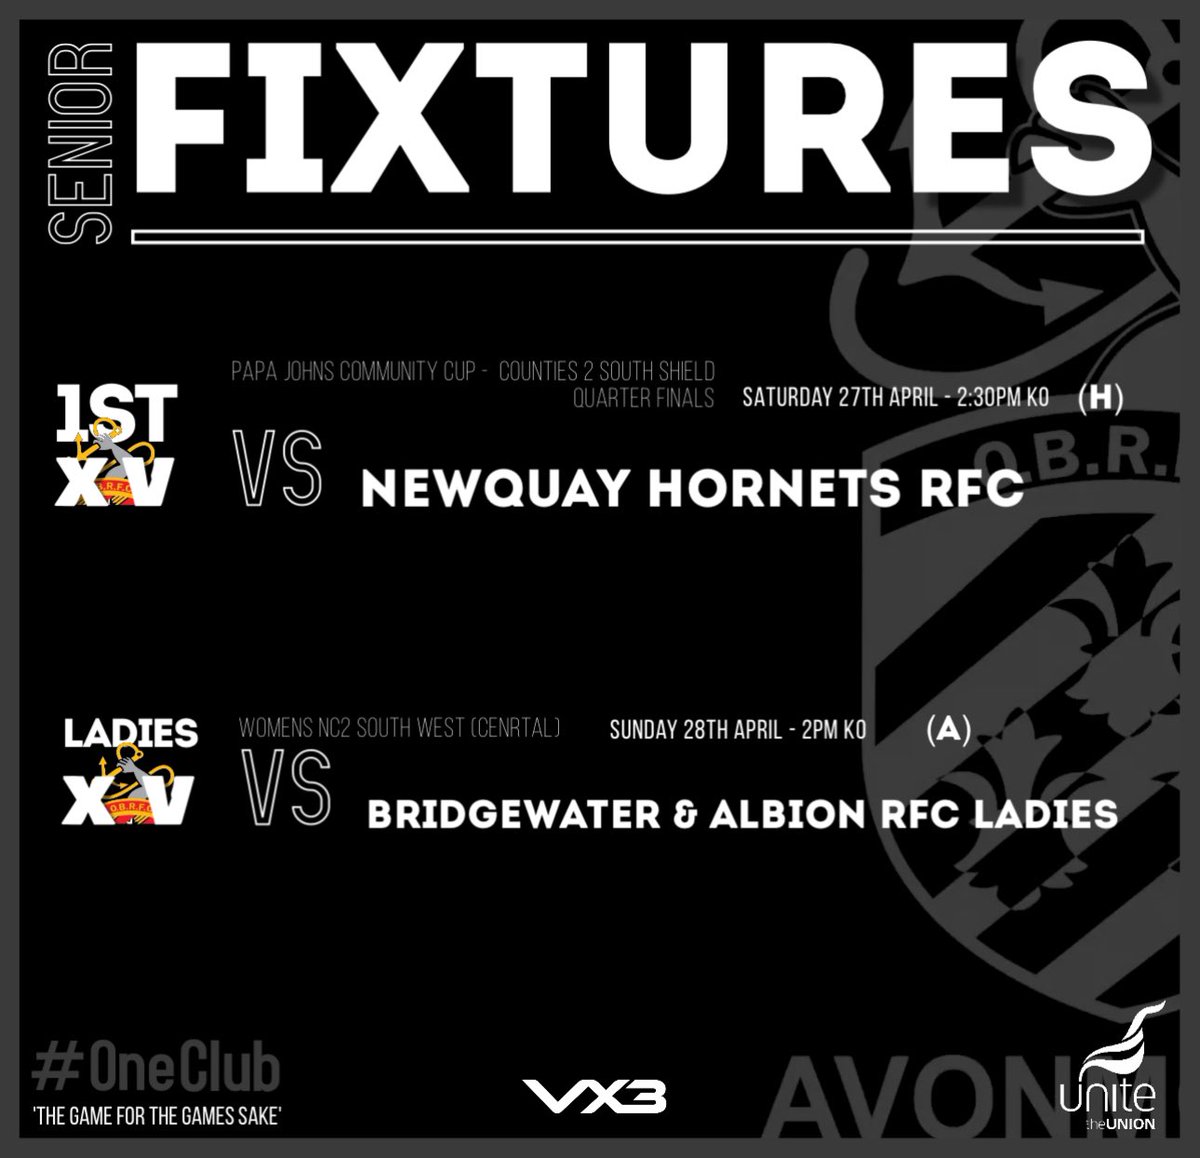 FIXTURES⤵️ Saturday sees the 1st XV take on Newquay Hornets RFC (H) in the 1/4 Finals of the Papa Johns Counties 2 South Shield. Whilst our Ladies travel on Sunday to Bridgewater&Albion RFC Ladies in their final league game of the season. ⚫️🔴⚫️ @swsportsnews @GRFUrugby